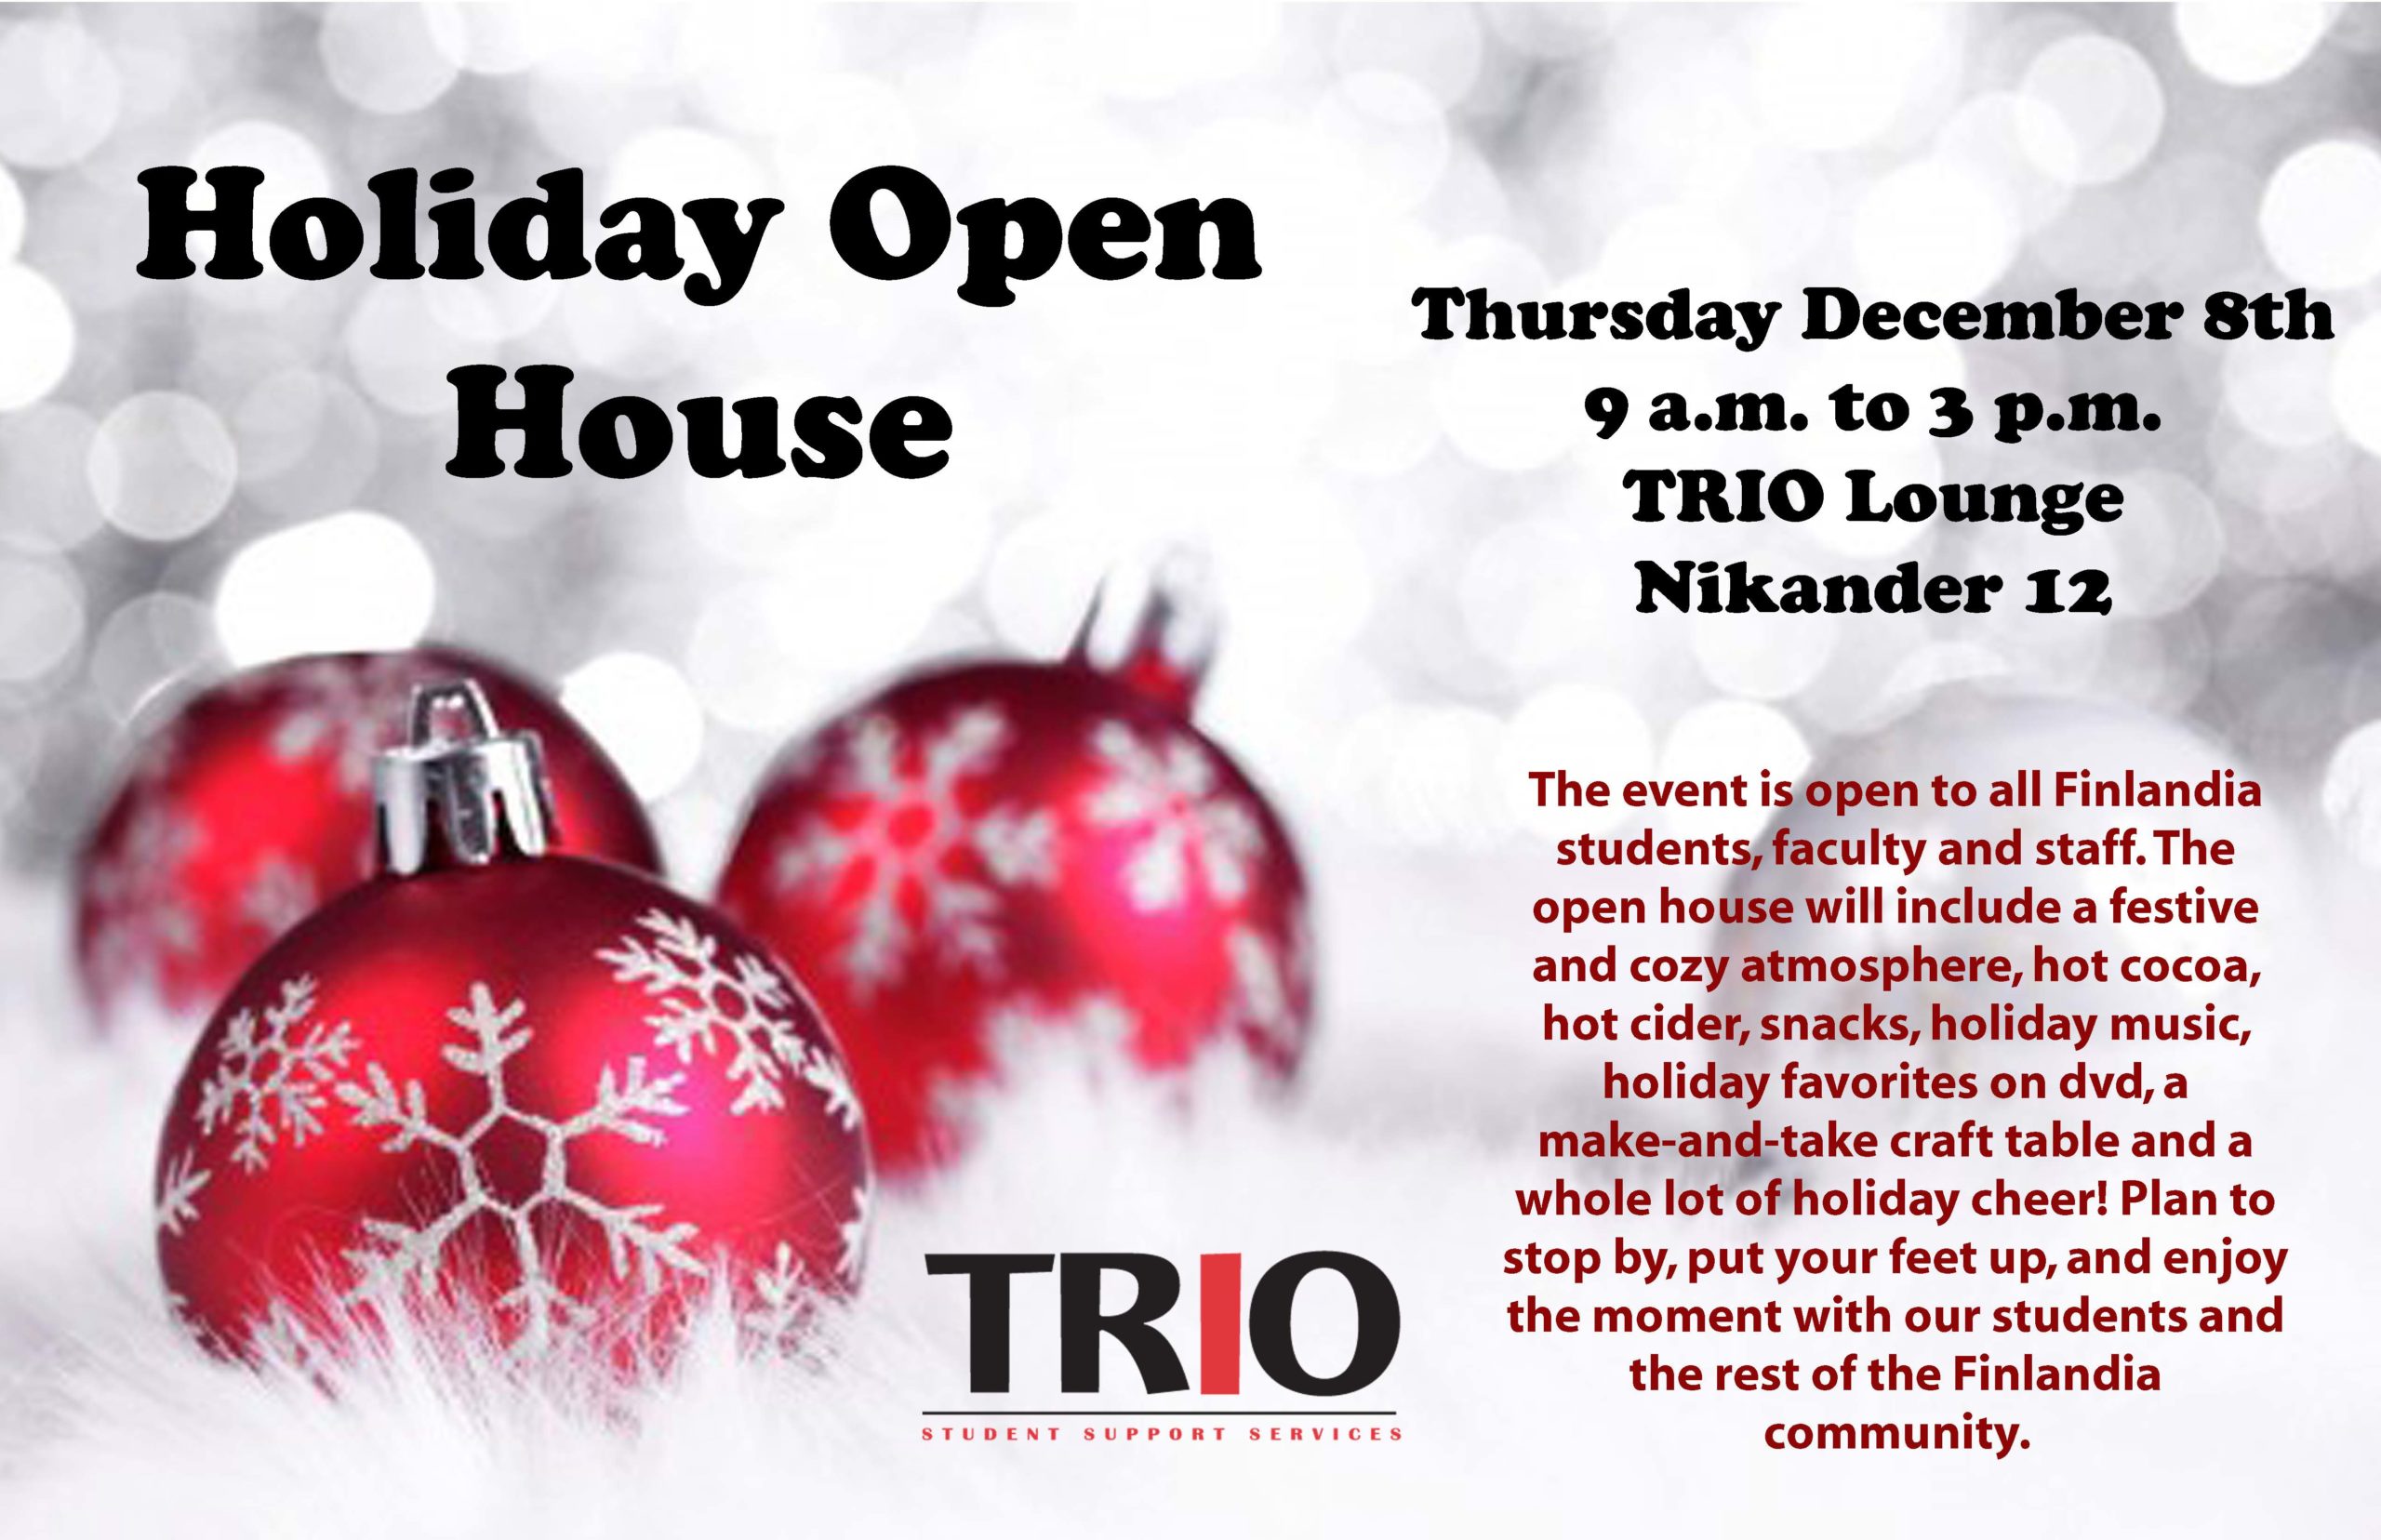 TRIO-TLC Holiday Open House 2022